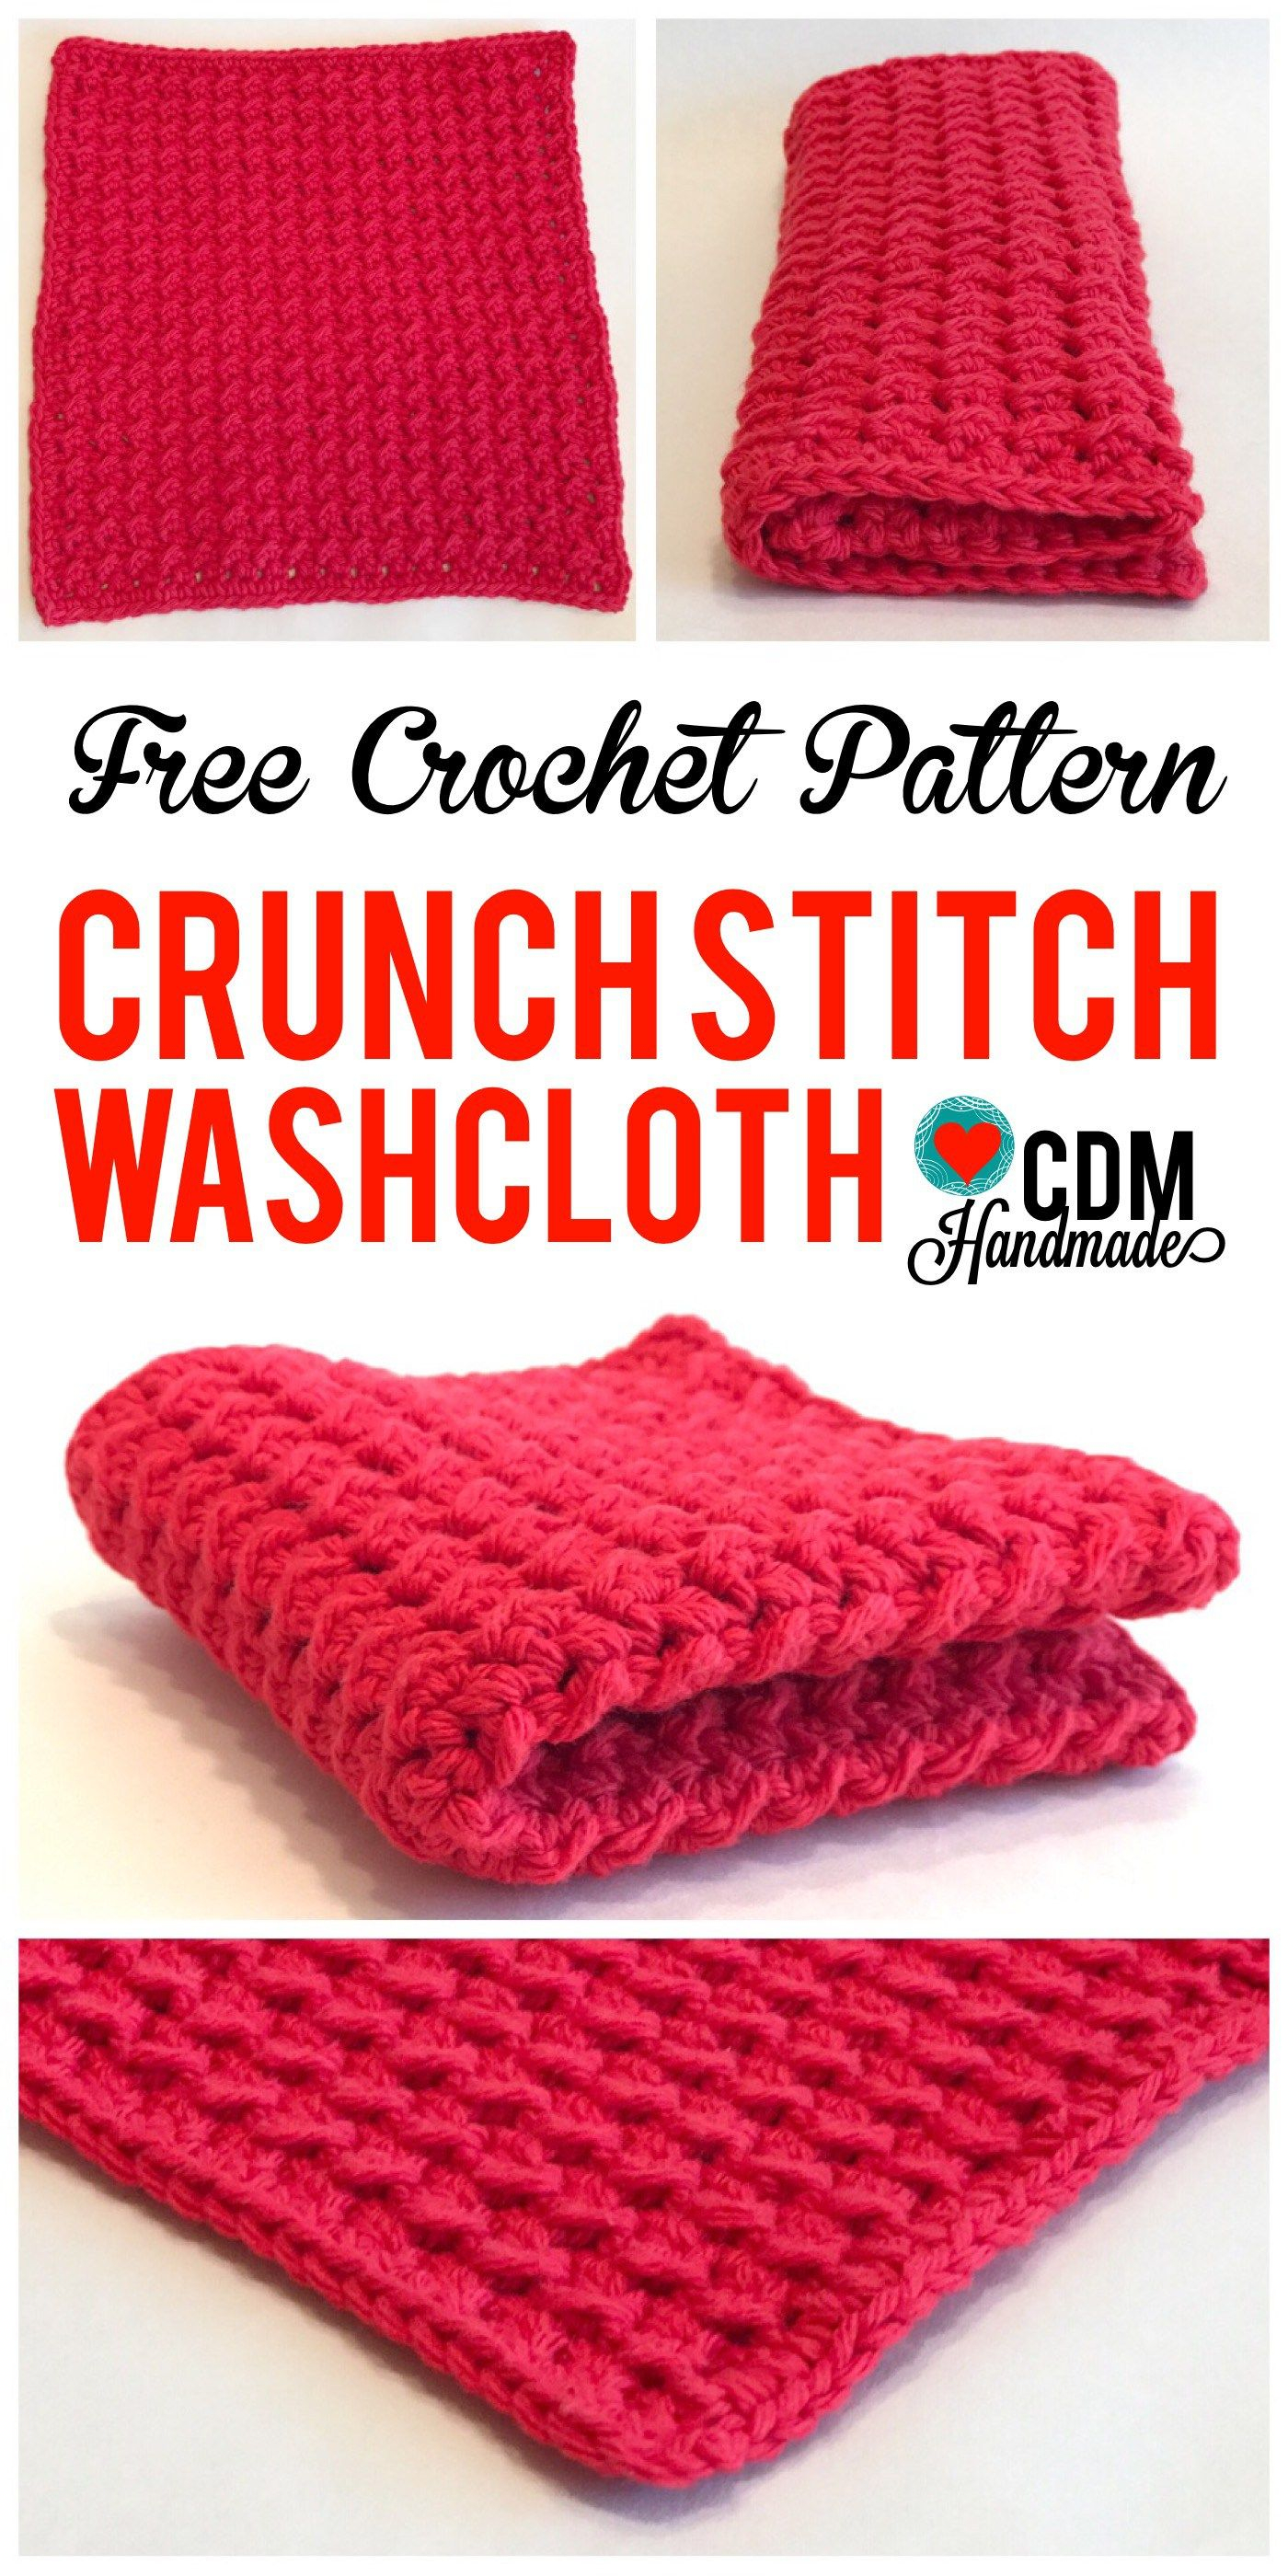 Dishcloth Crochet Patterns Check Out This Quick And Easy Free Crochet Washcloth Pattern For My